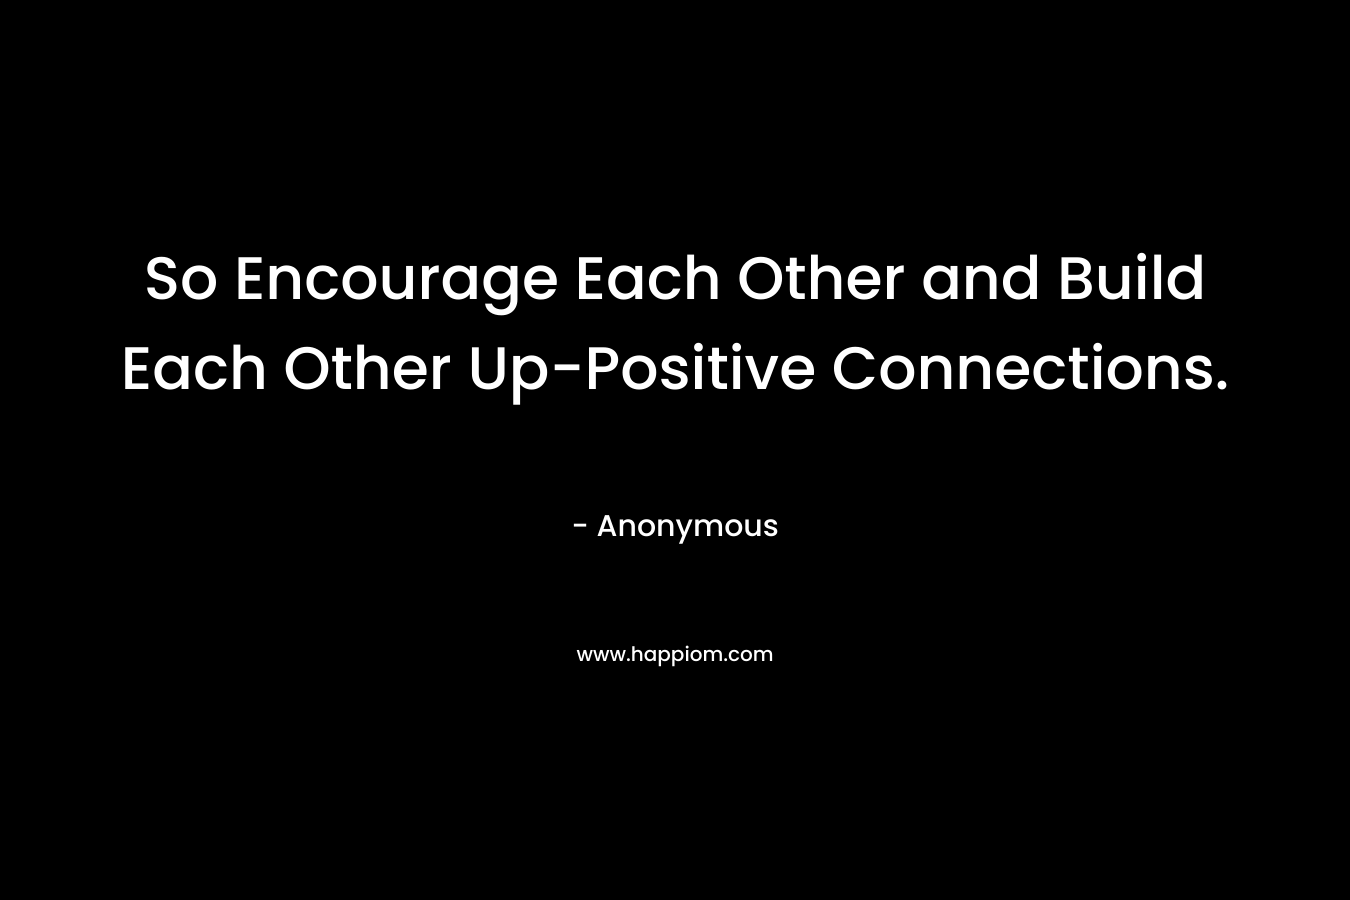 So Encourage Each Other and Build Each Other Up-Positive Connections. – Anonymous